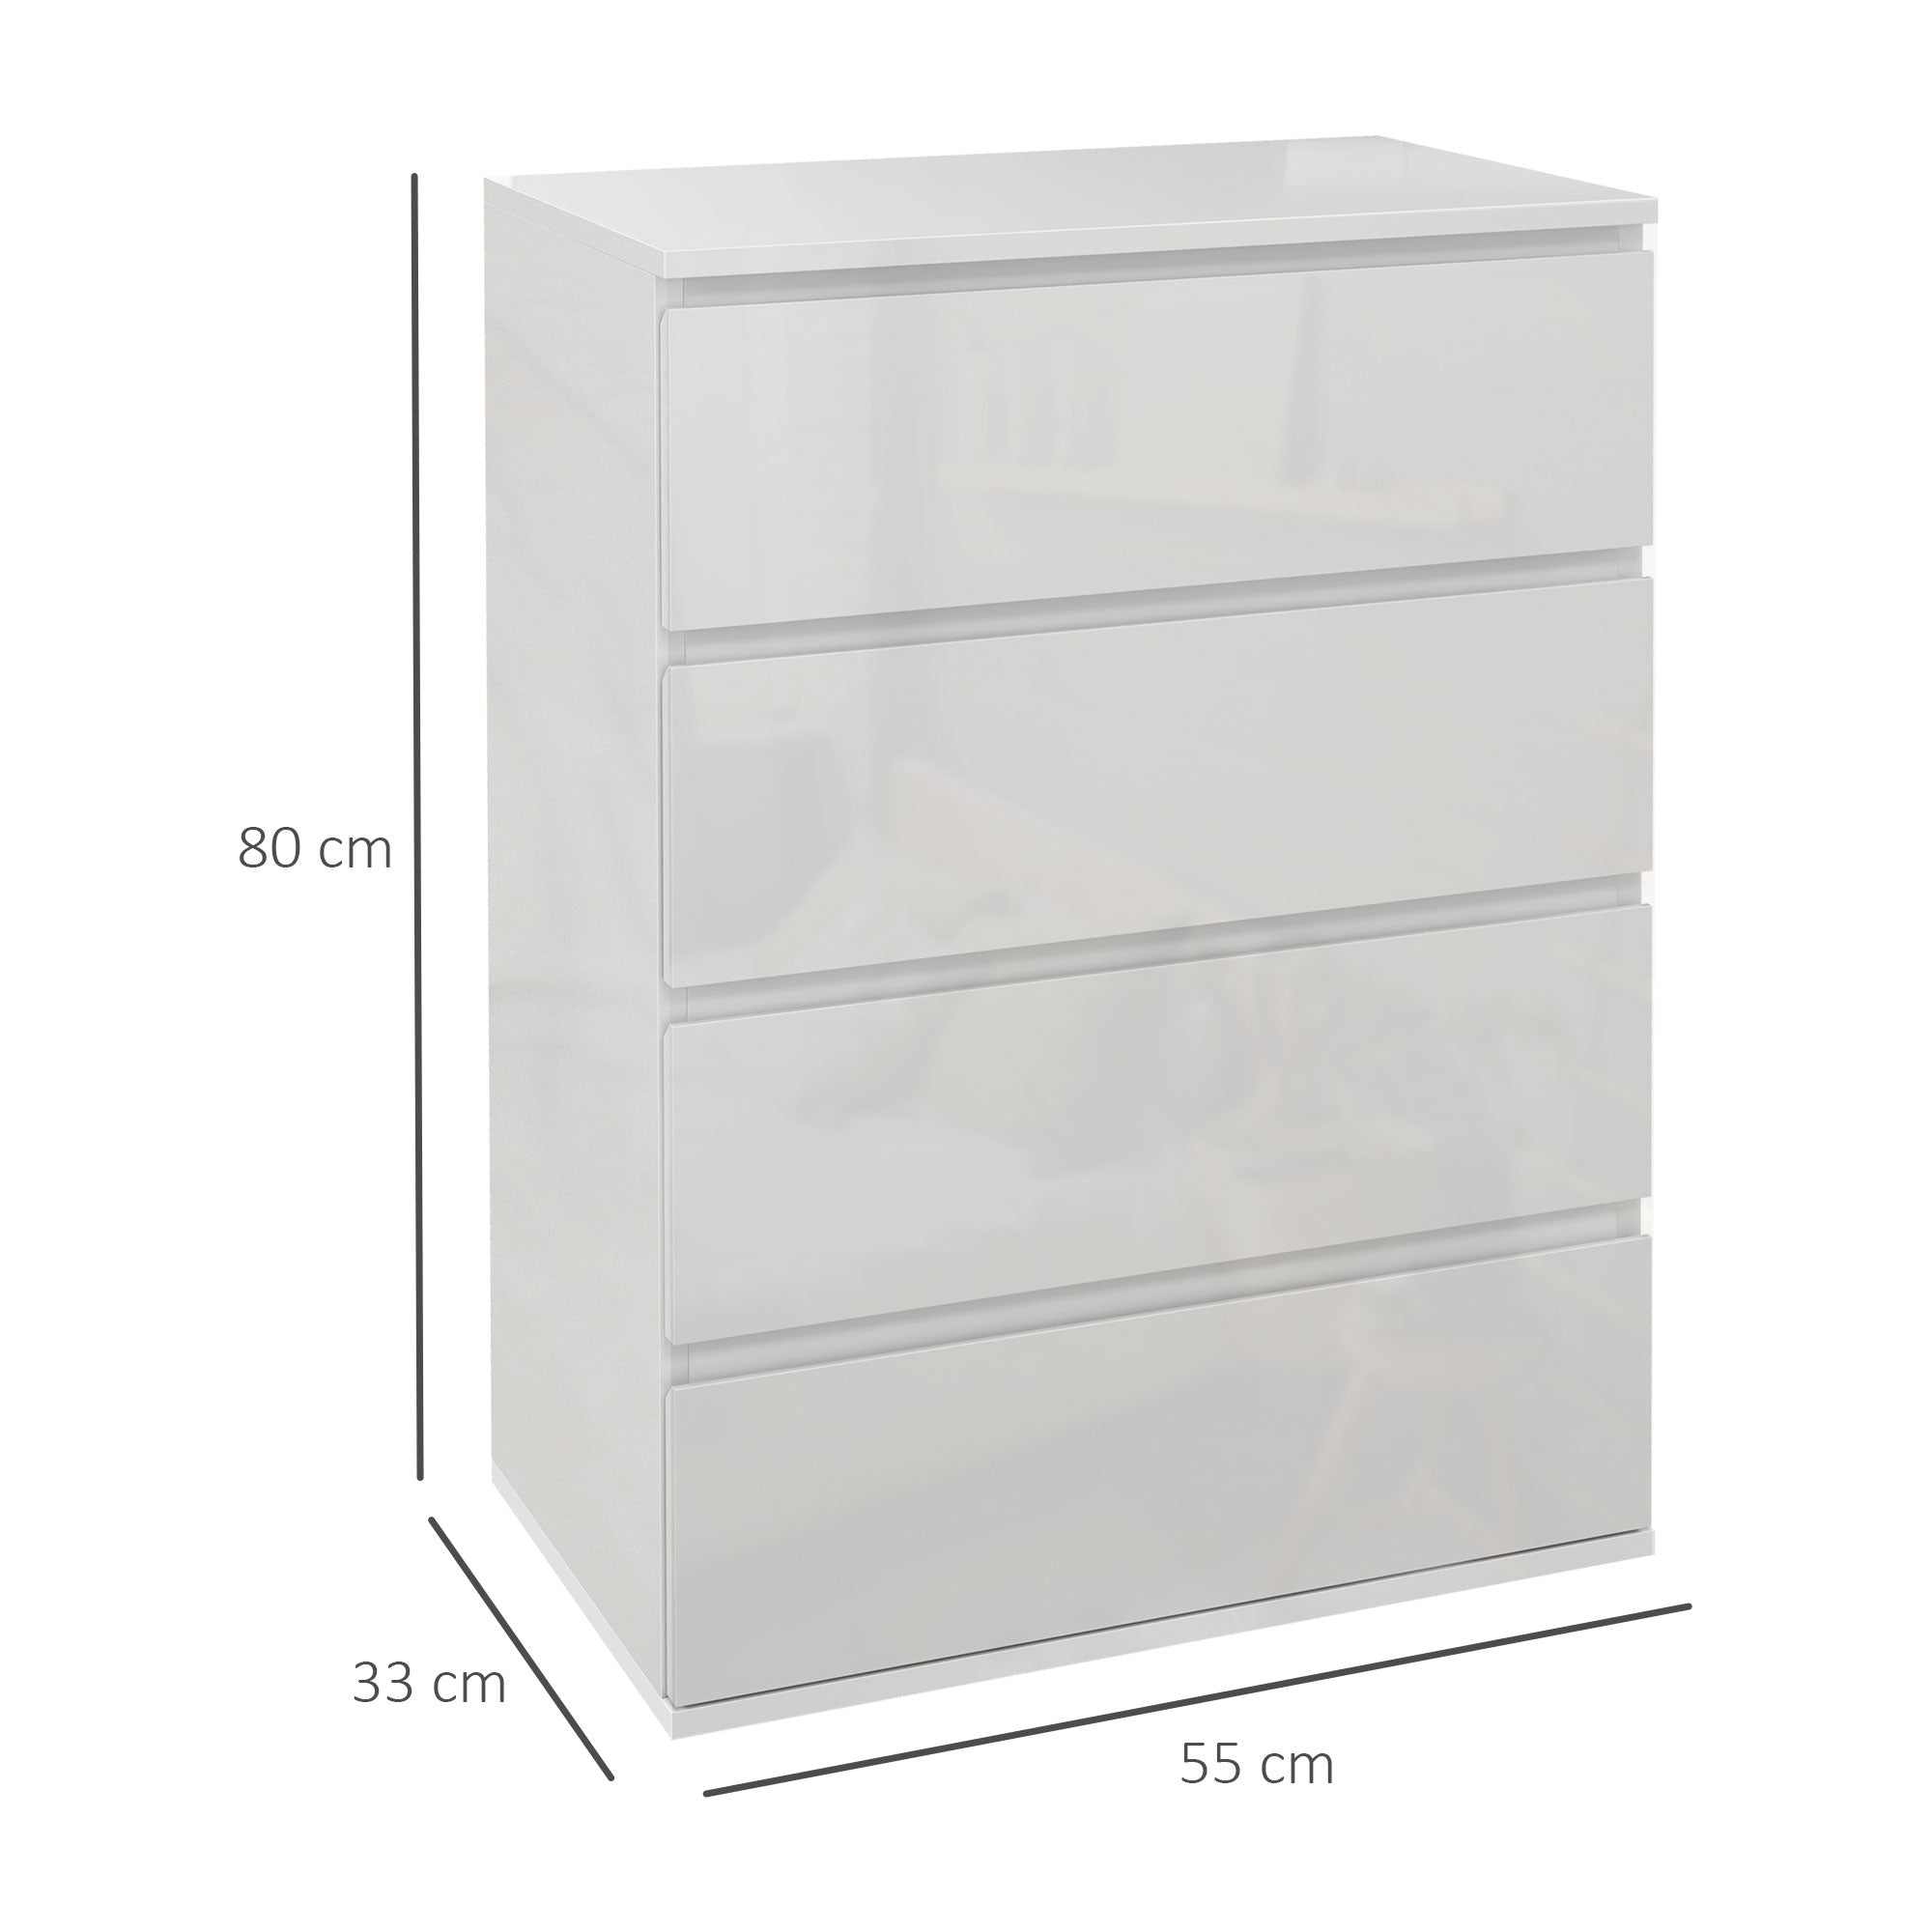 High Gloss 4 Drawer Chest Of Drawers,4-Drawer Storage Cabinets, Modern Dresser, Storage Drawer Unit for Bedroom, White-2